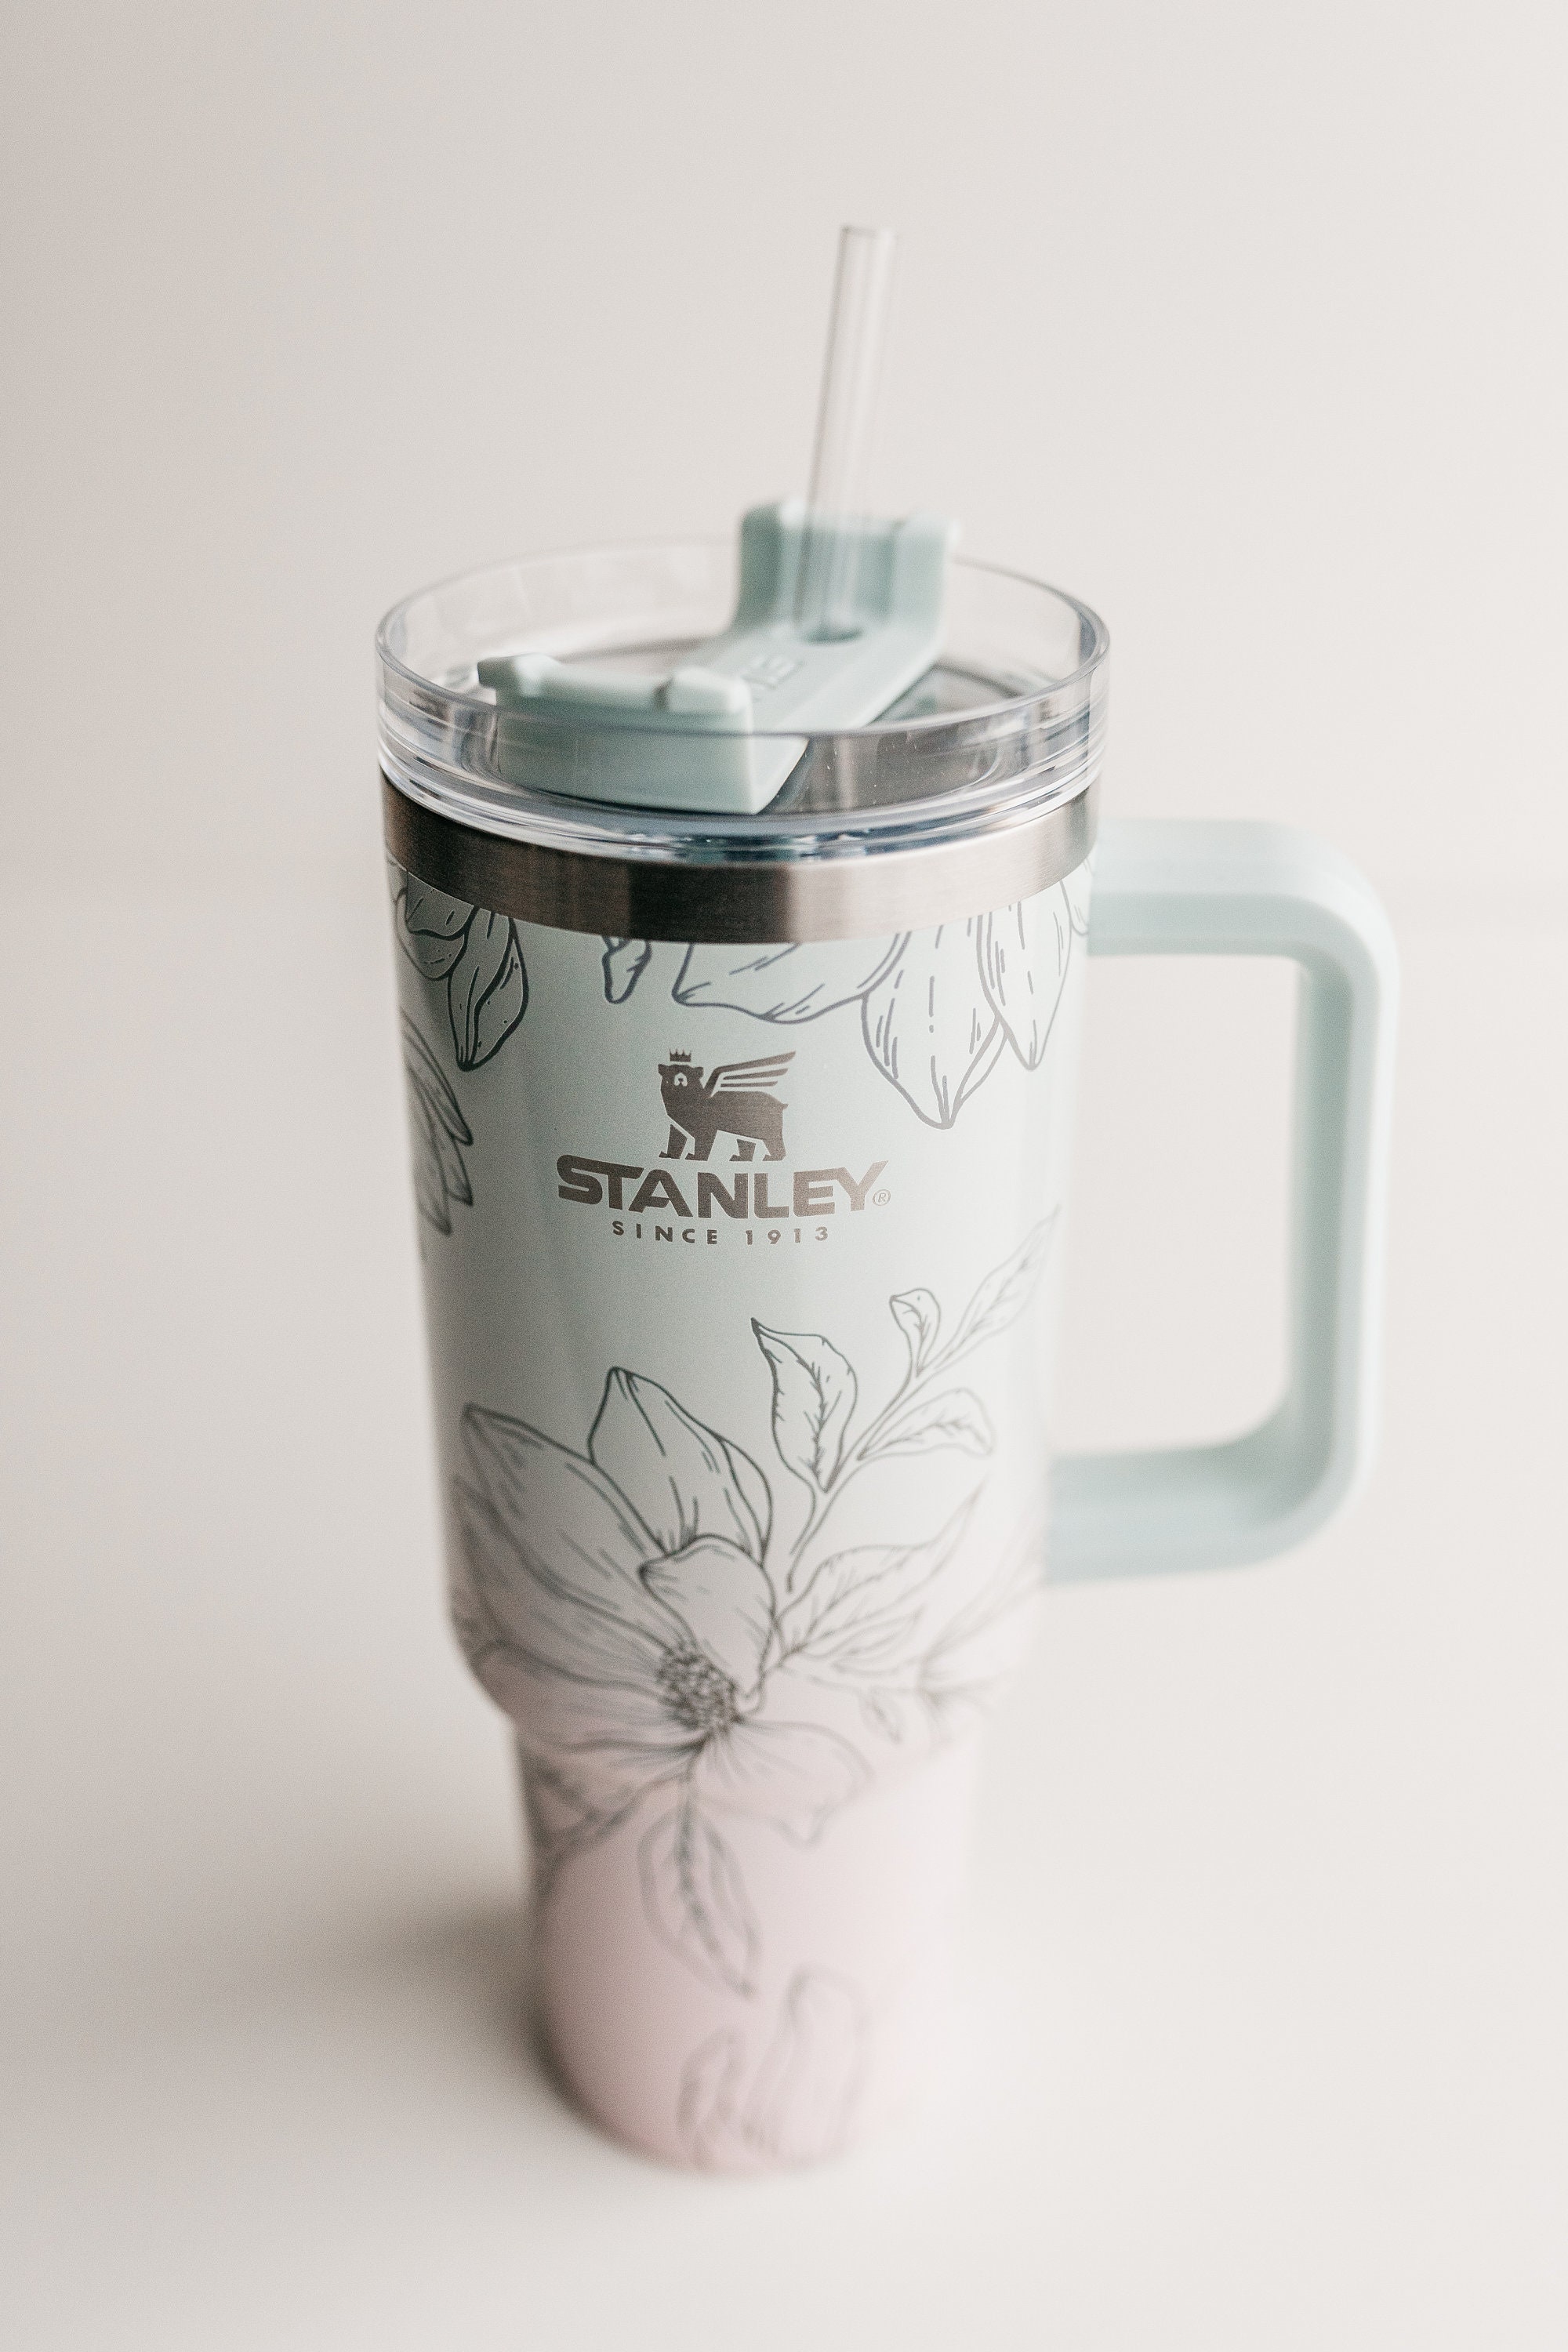 Stanley 40oz Tumbler Custom Engraved With Magnolia Florals 